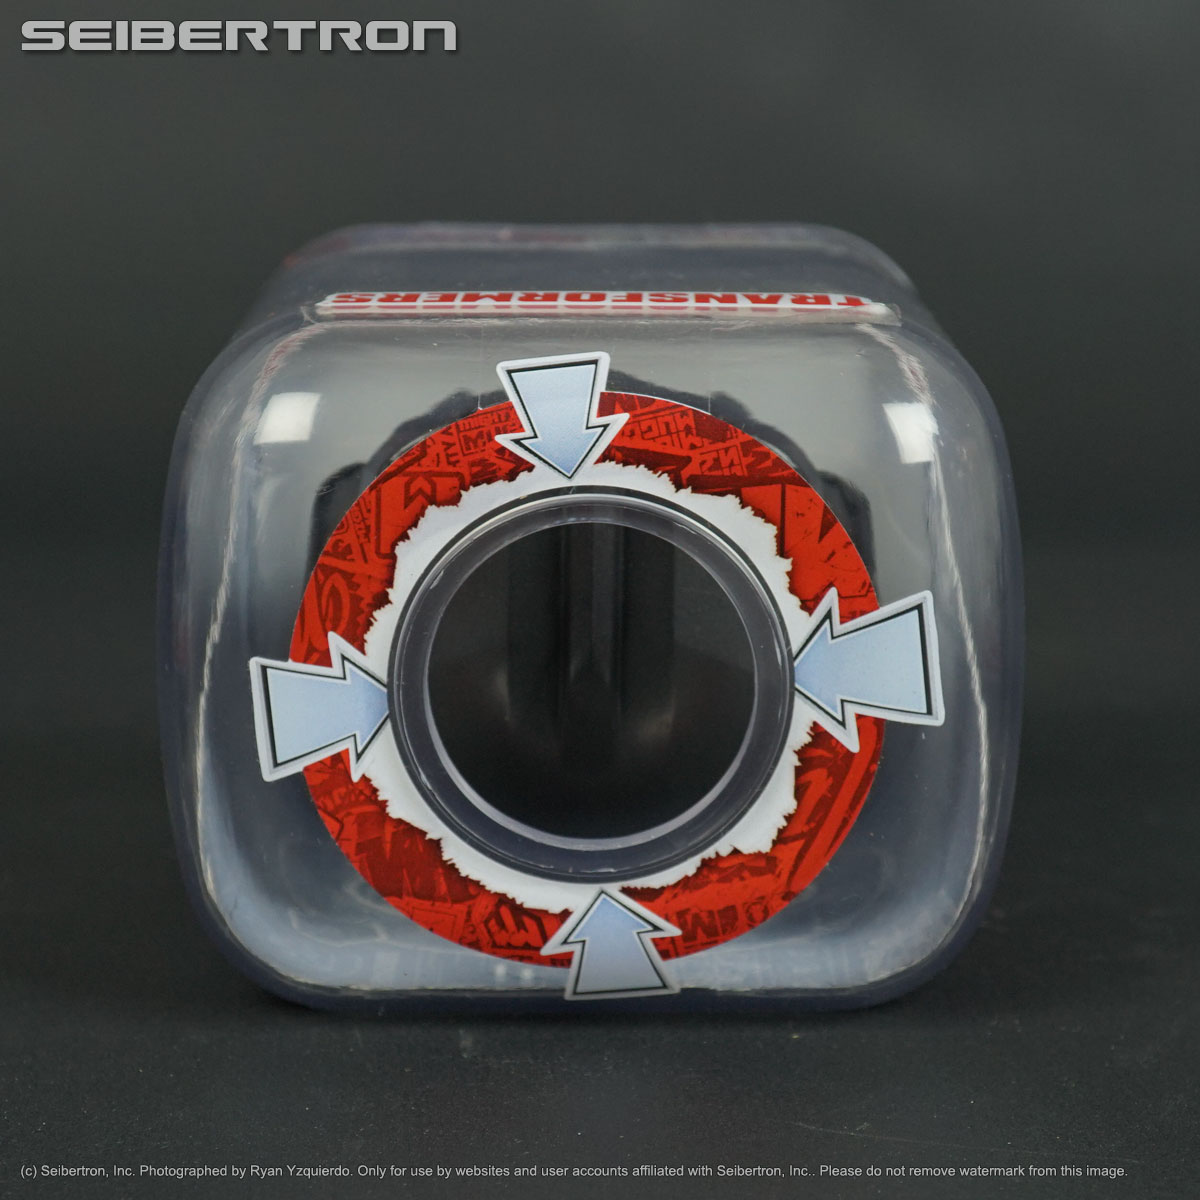 Transformers toys, Comic Books, BotBots, Masters of the Universe, Teenage Mutant Ninja Turtles, Gobots, and other listings from Seibertron.com: MIGHTY MUGGS 04 Transformers STARSCREAM Hasbro 2018 New